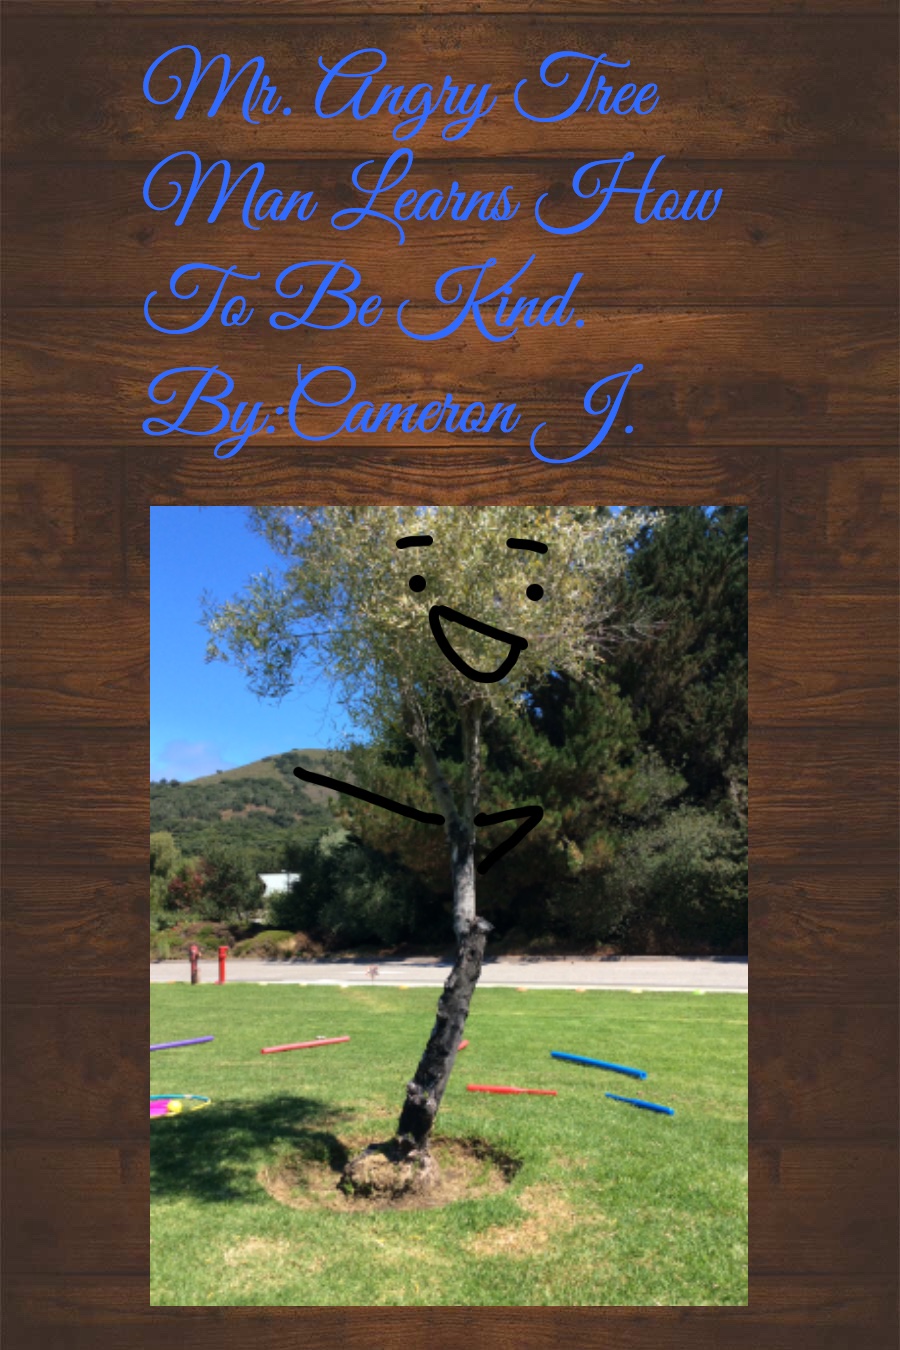 Mr Angry Tree Man Learns How to be Kind by Cammy J